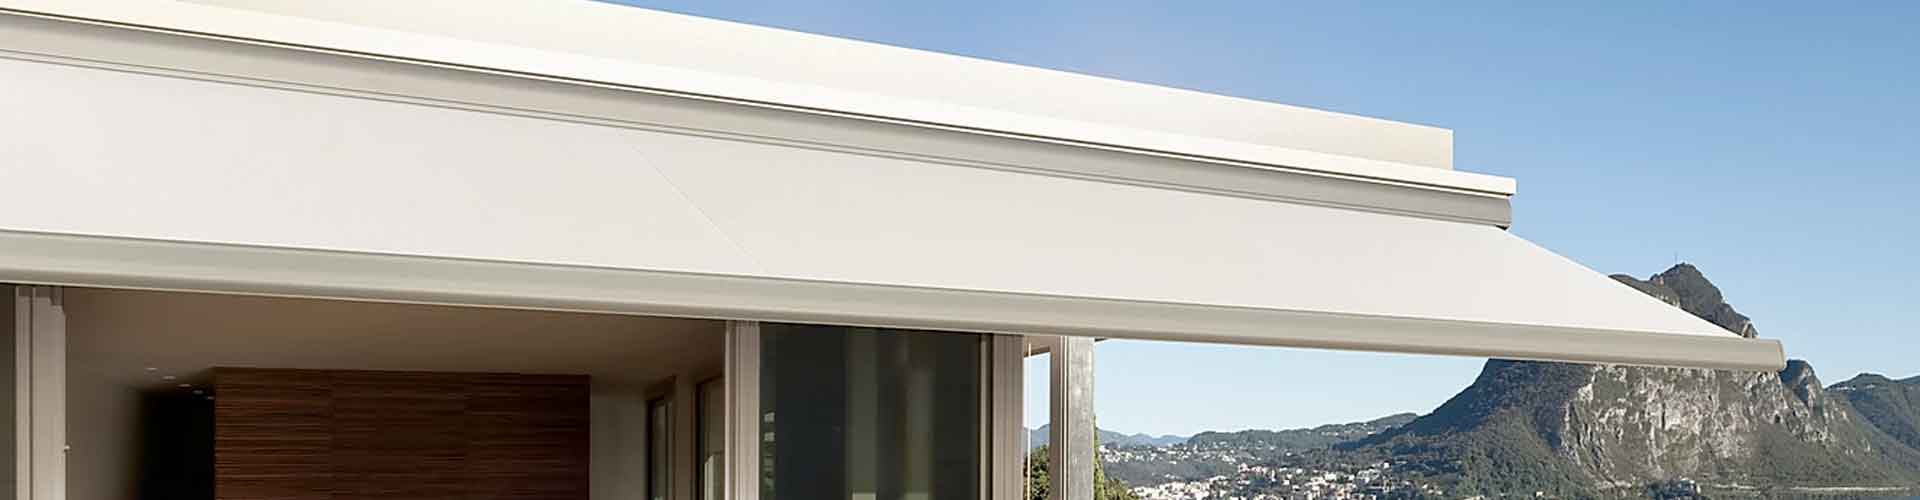 Eclipse Awning Systems